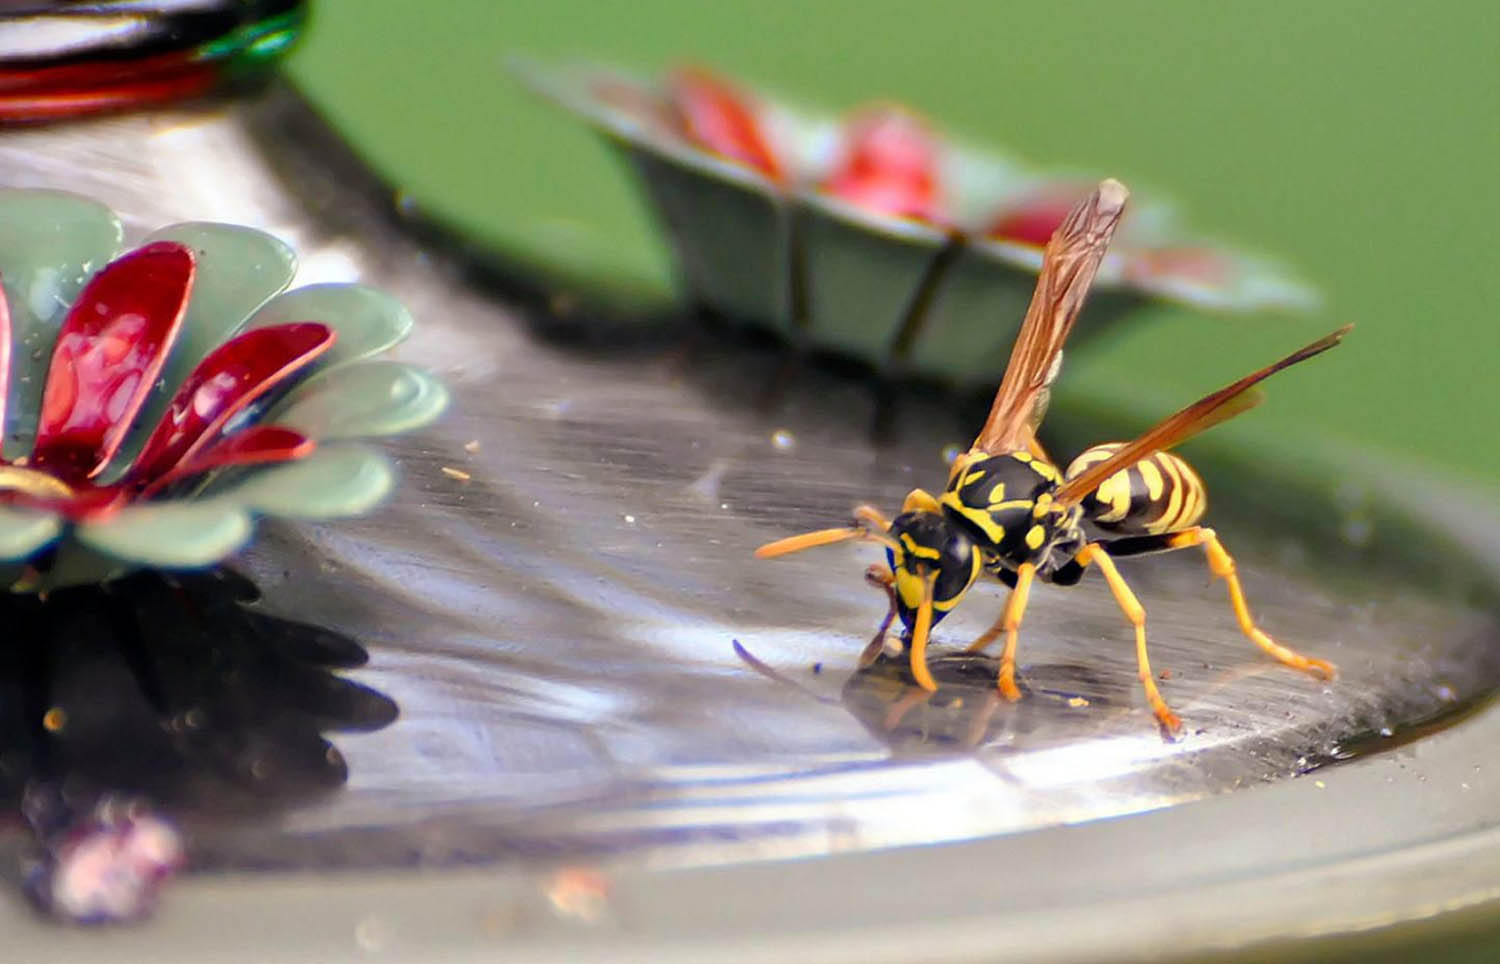 how to prevent a wasp infestation